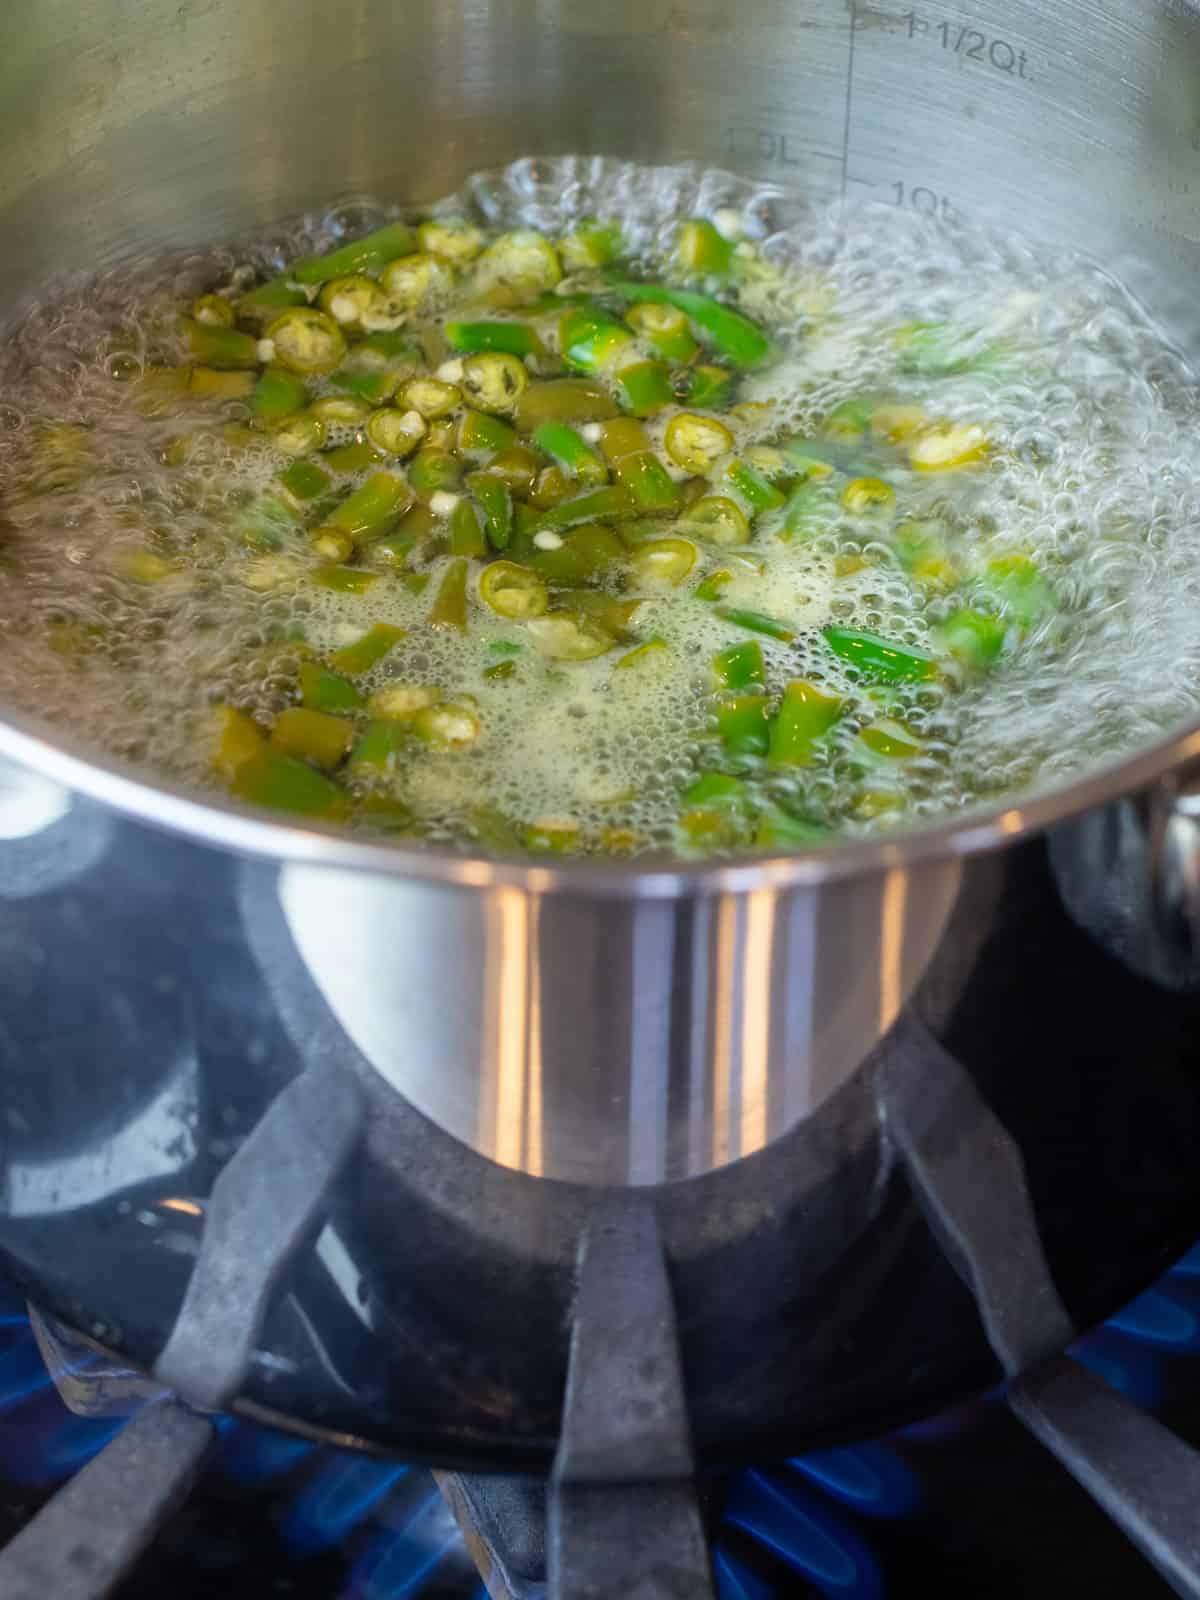 Boiling water and vinegar in a pot with chopped green chillies.